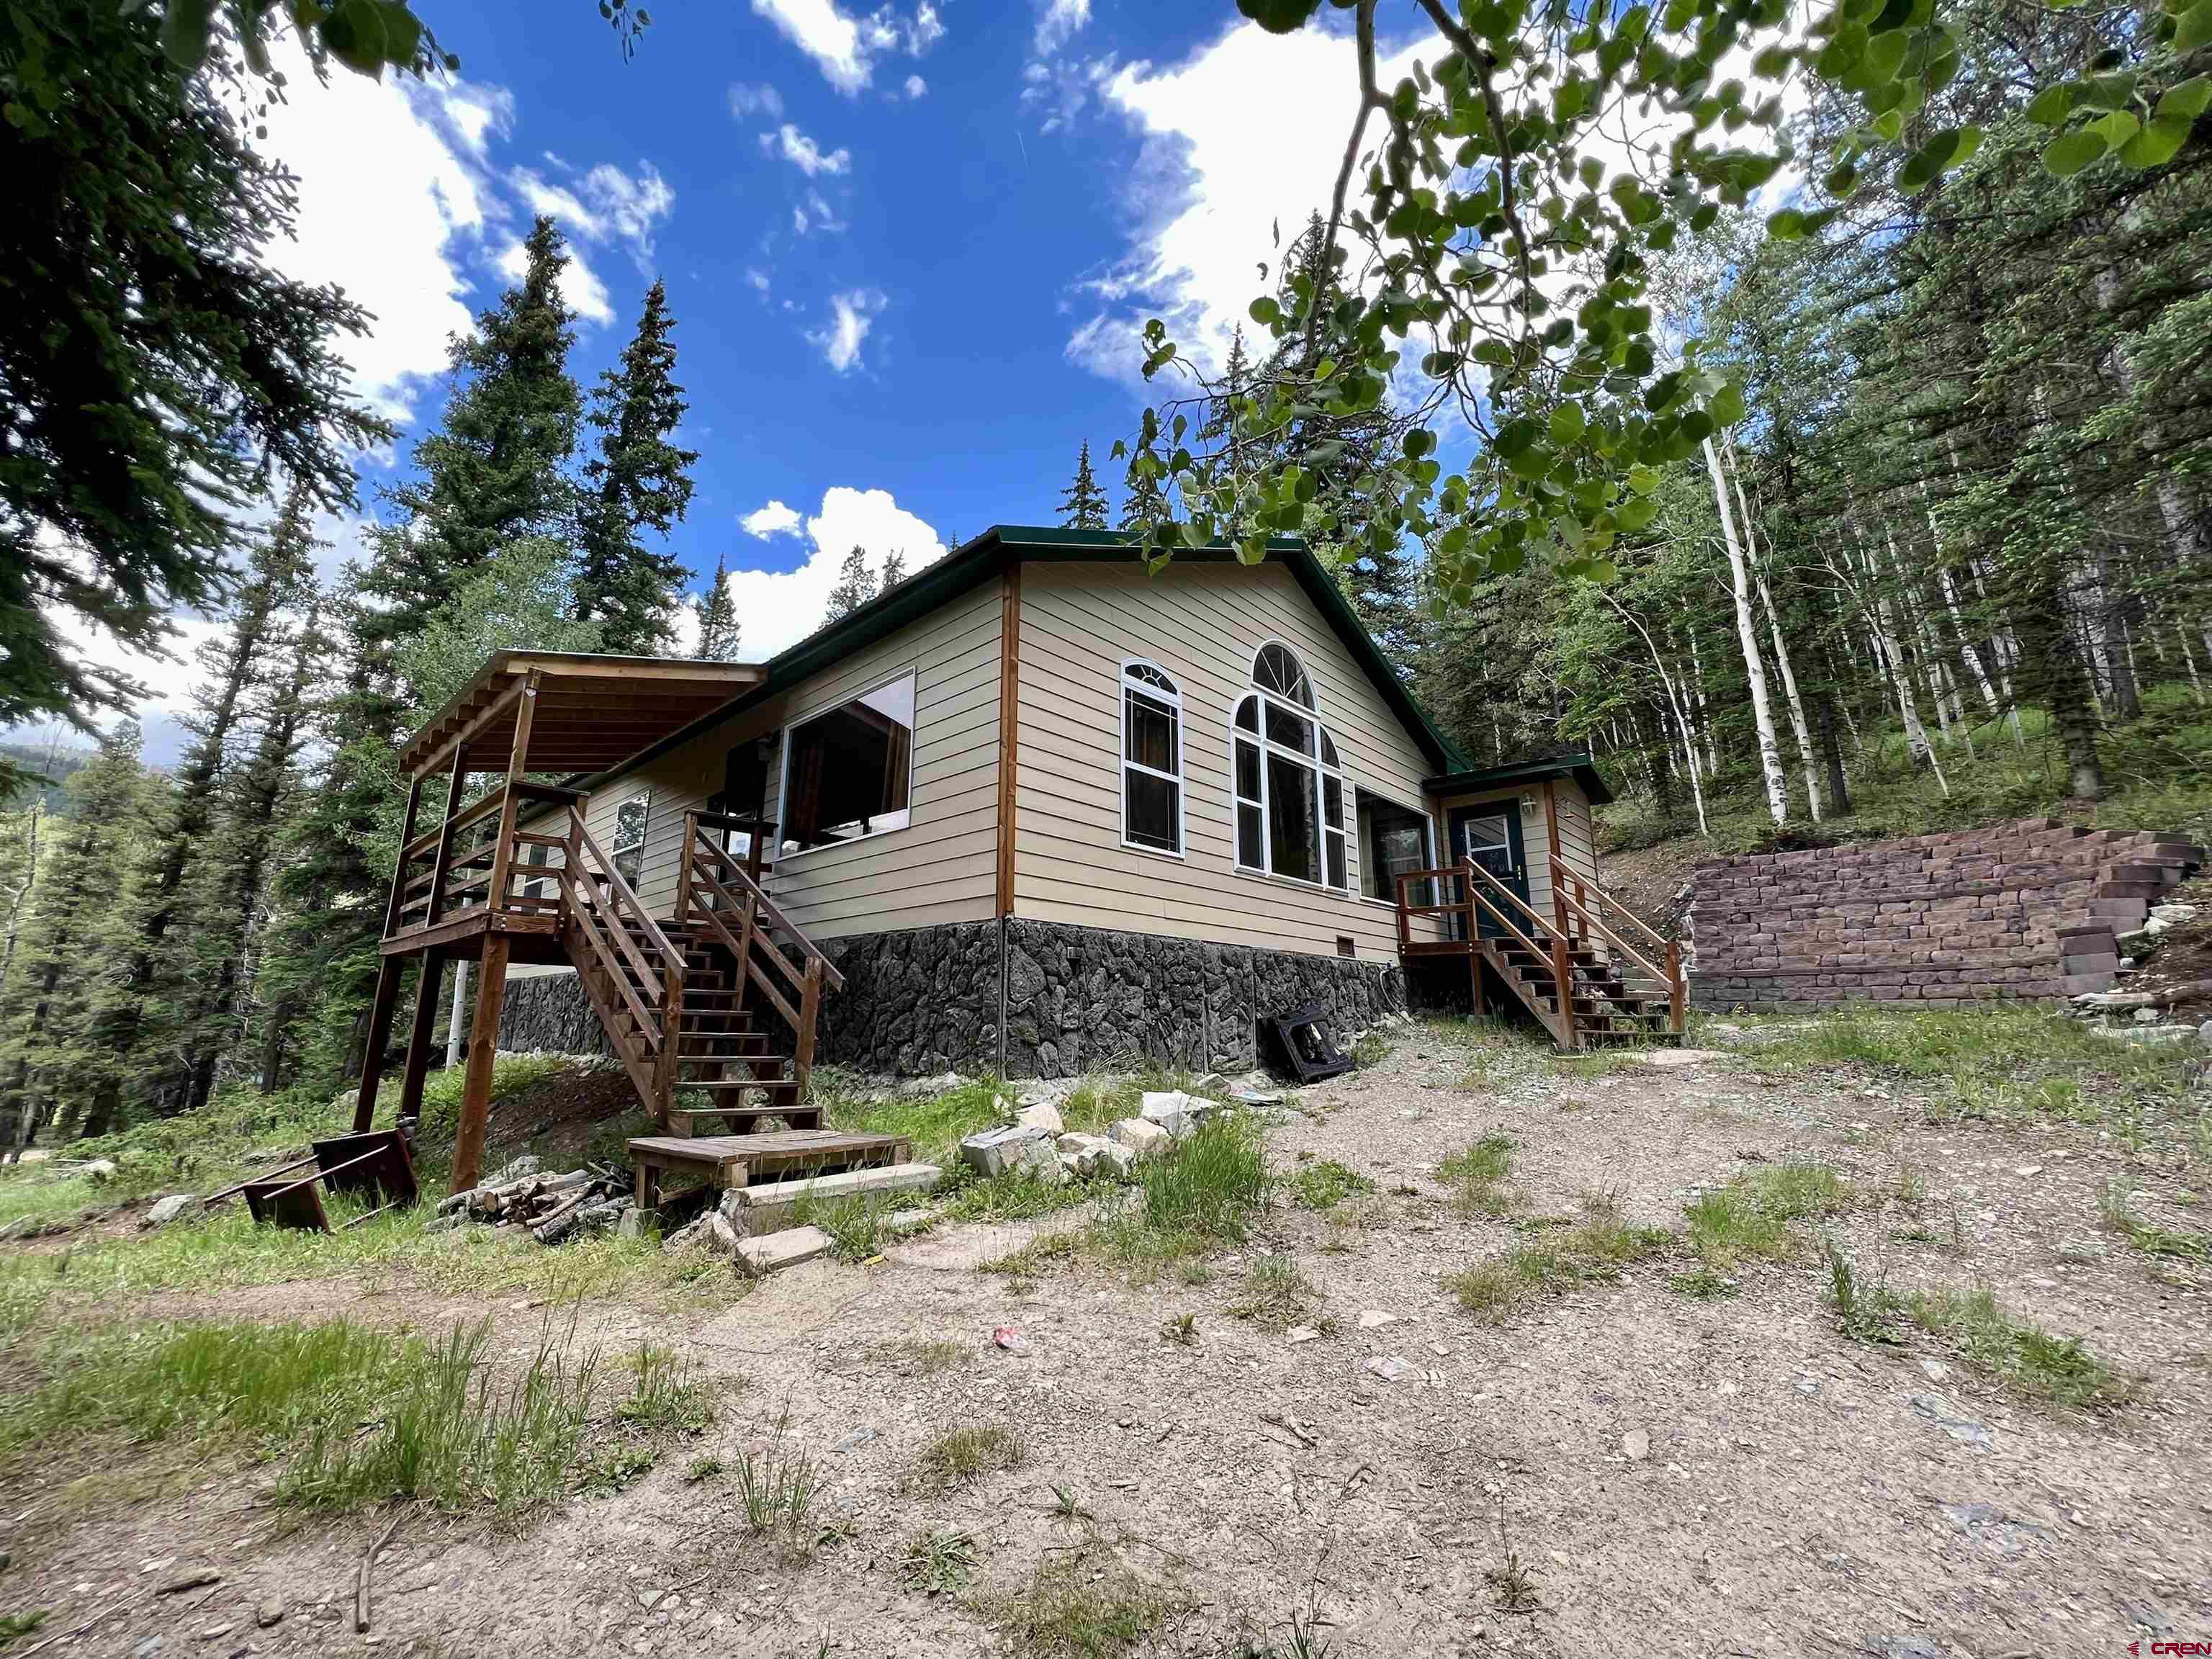 Fantastic year-round home in the Town of Pitkin features 3 bedrooms/2 full baths with cozy woodstove in the living room, large open kitchen, laundry room and work shed.  Tucked away in the trees, with easy access to trail riding.  Built in 2012, great condition, tile entryway, carpet bedrooms & wood flooring too!